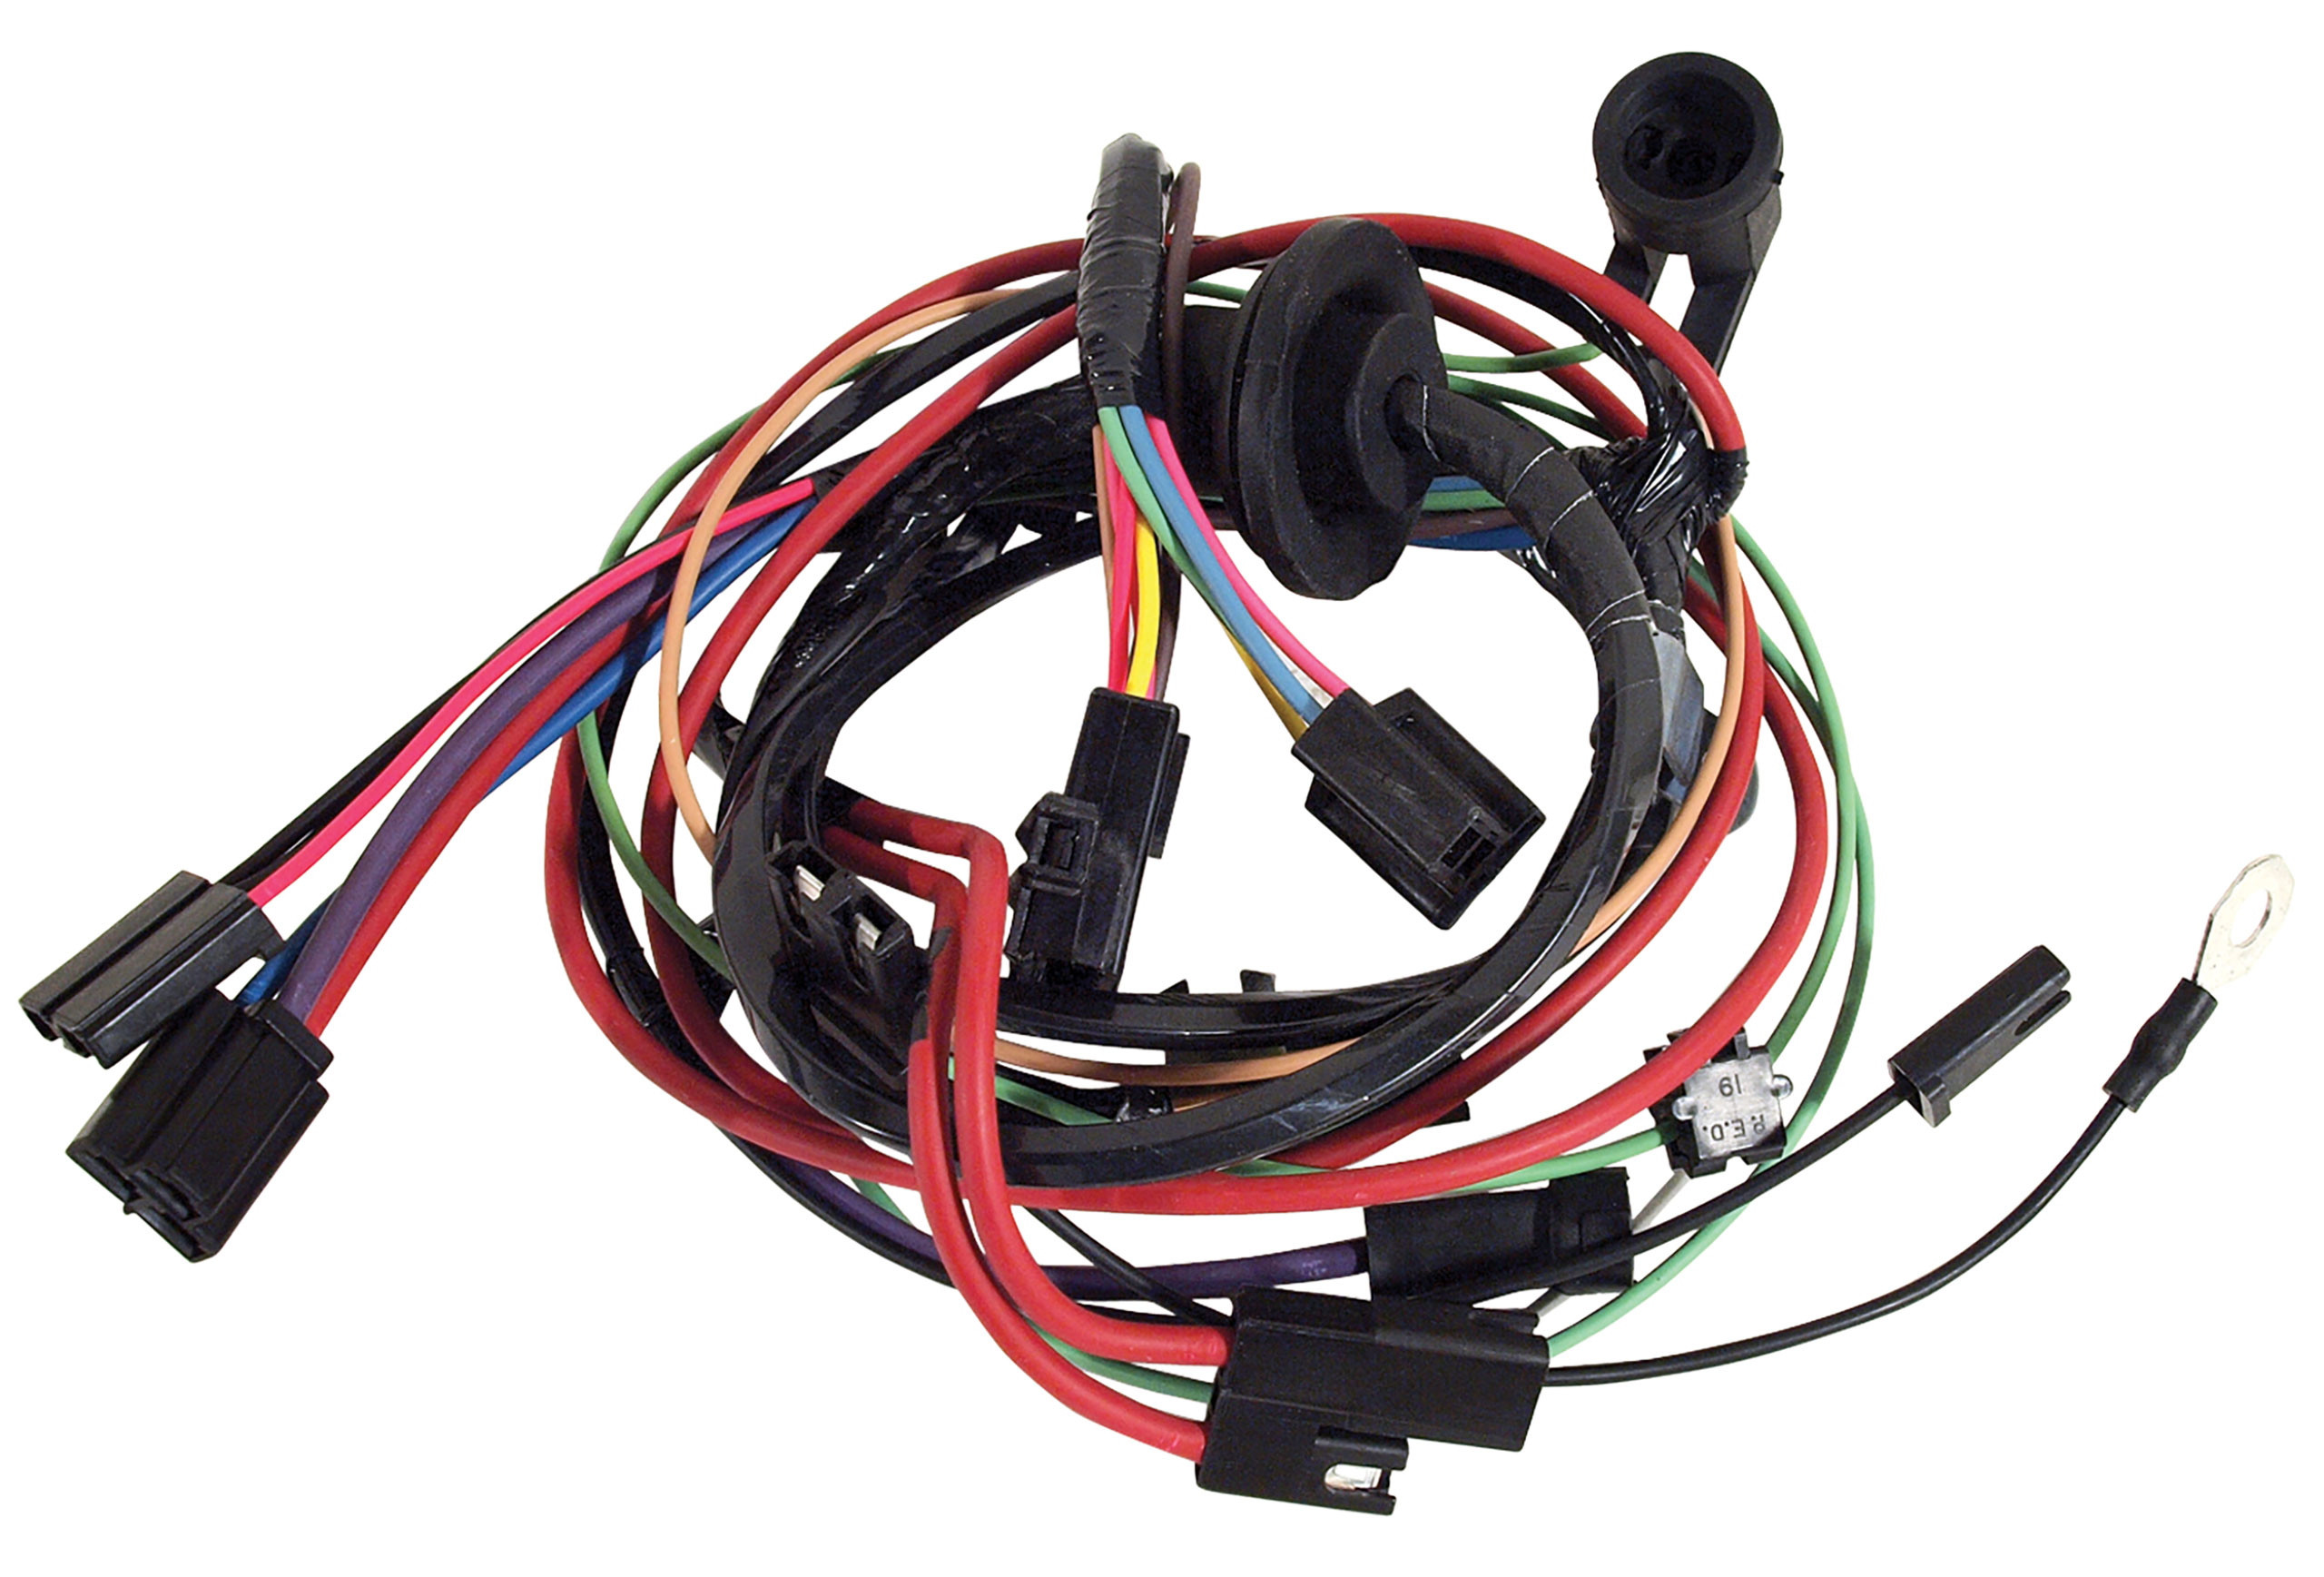 C3 1977 Chevrolet Corvette Harness. Air Conditioning W/Heater Wiring Early - Lectric Limited, Inc.